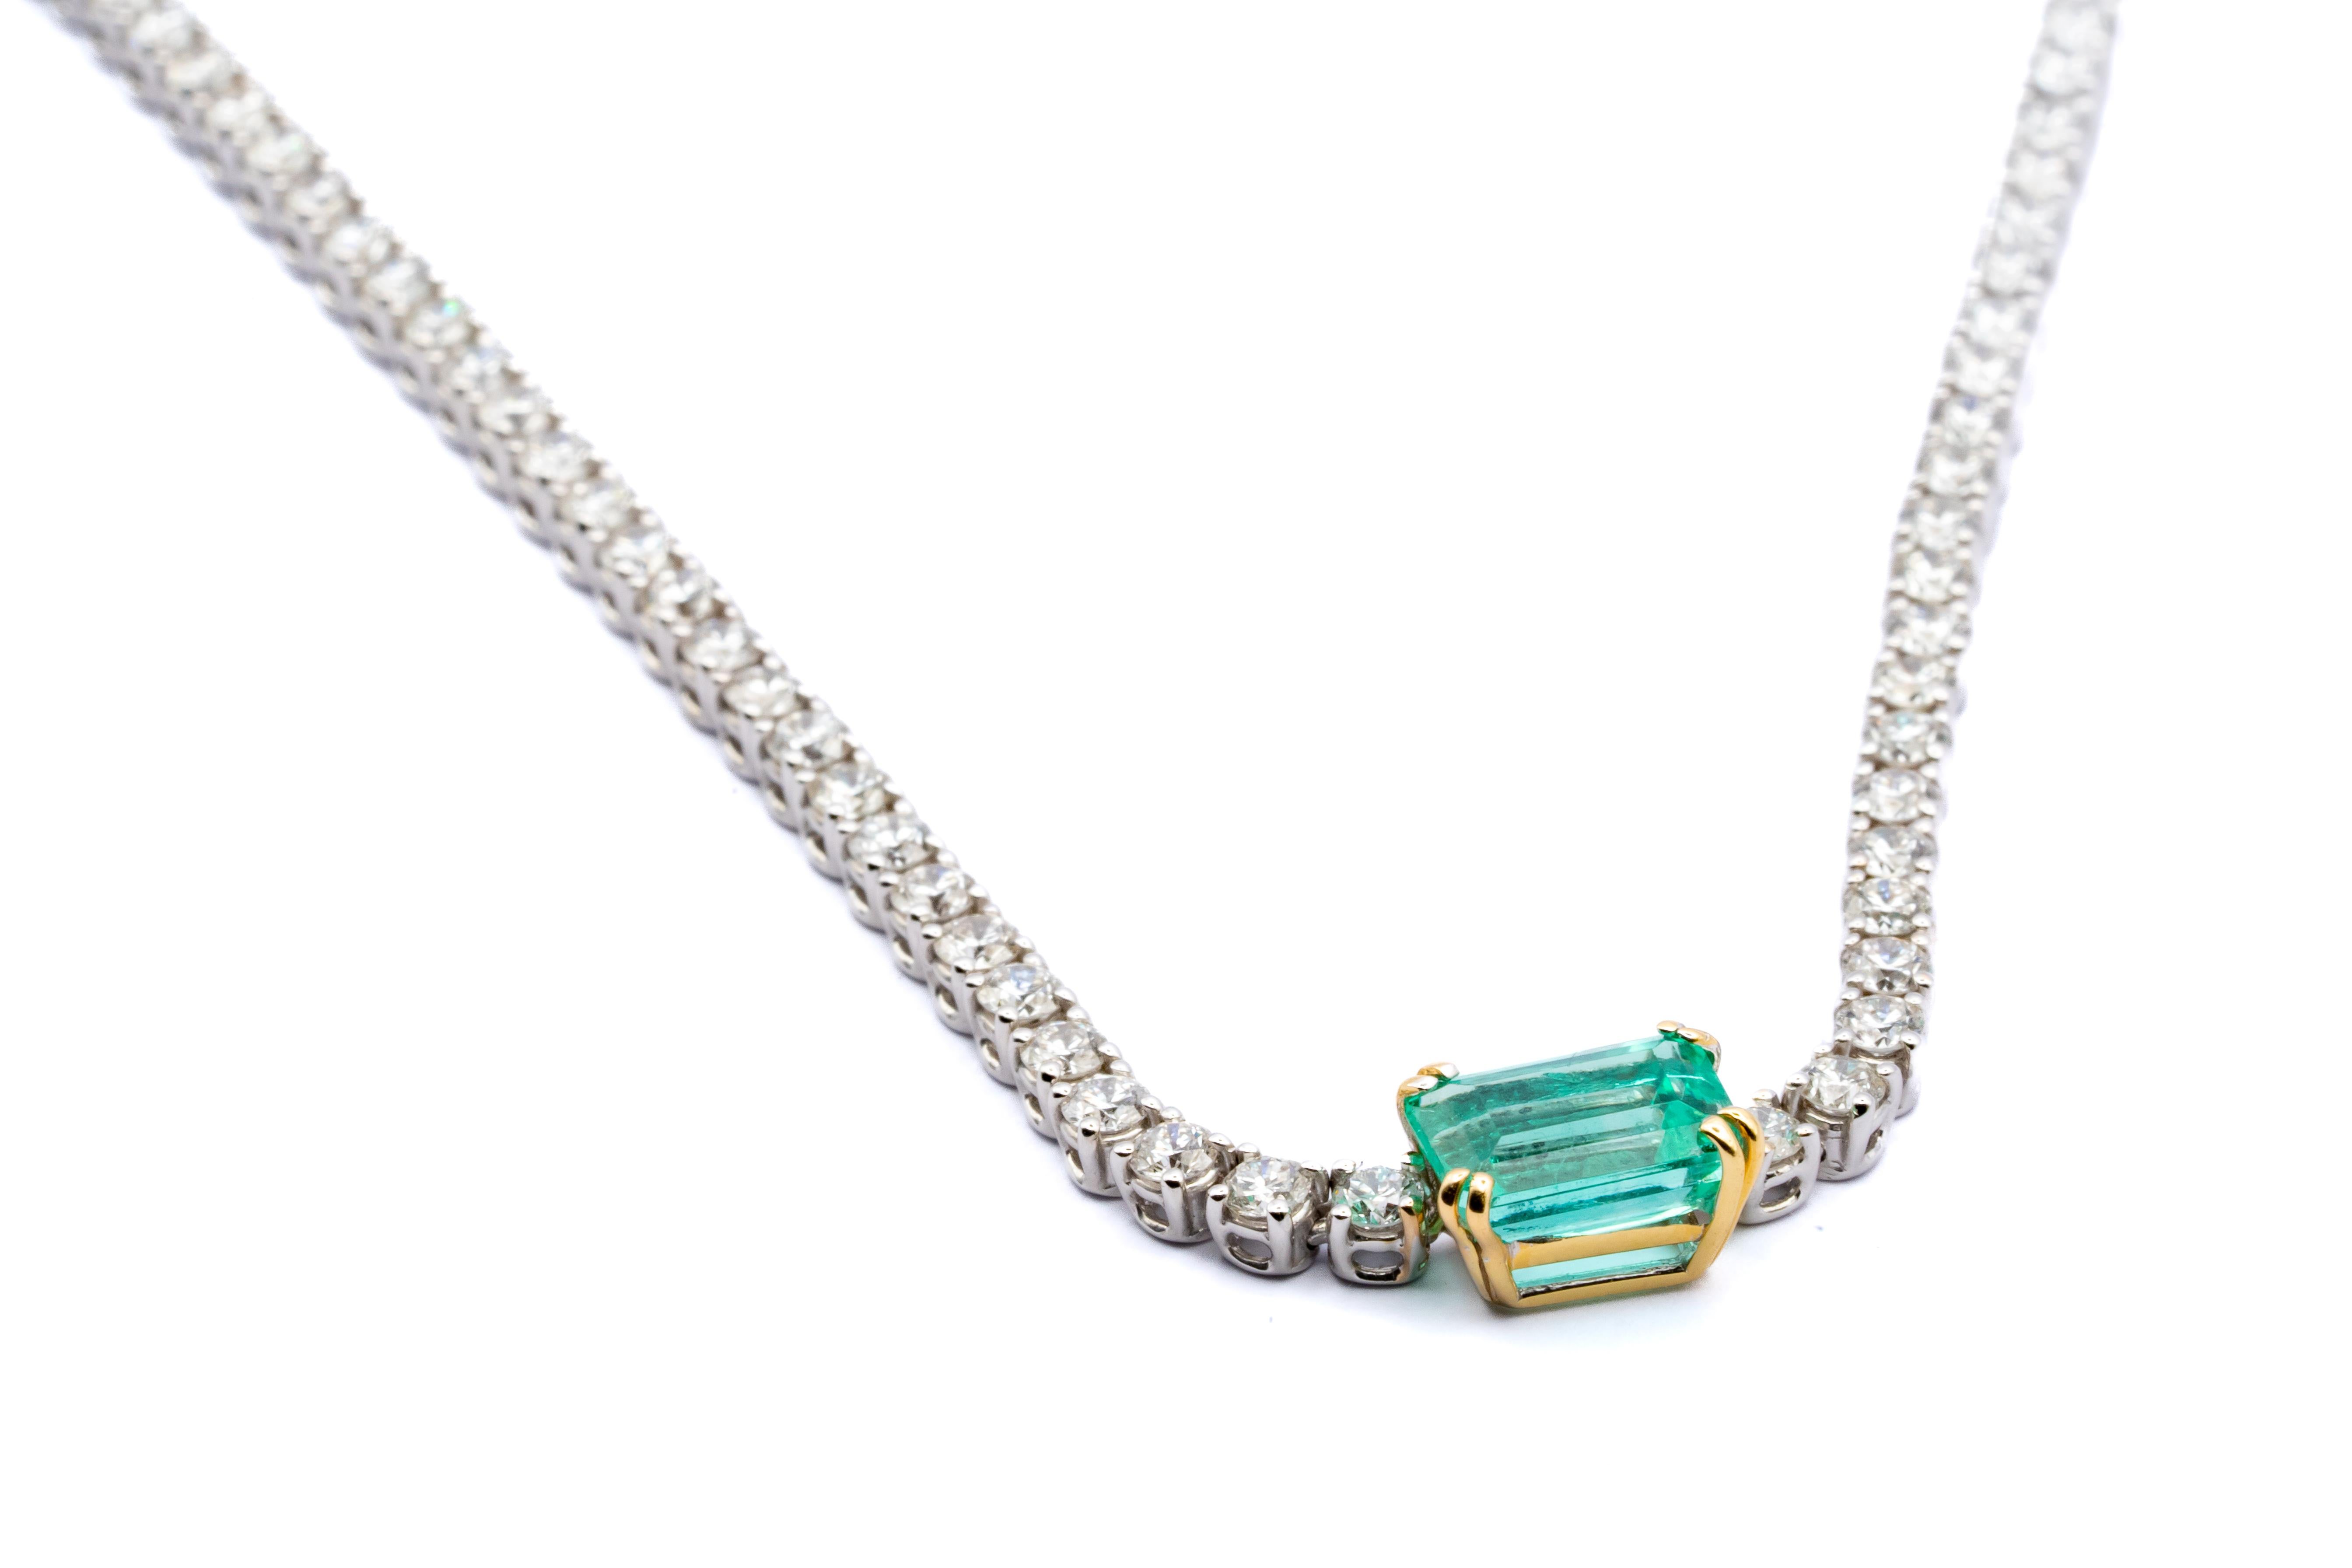 Contemporary 7.25 Carat VS G White Gold Tennis Necklace with Colombian Emerald Carat 2.15 For Sale